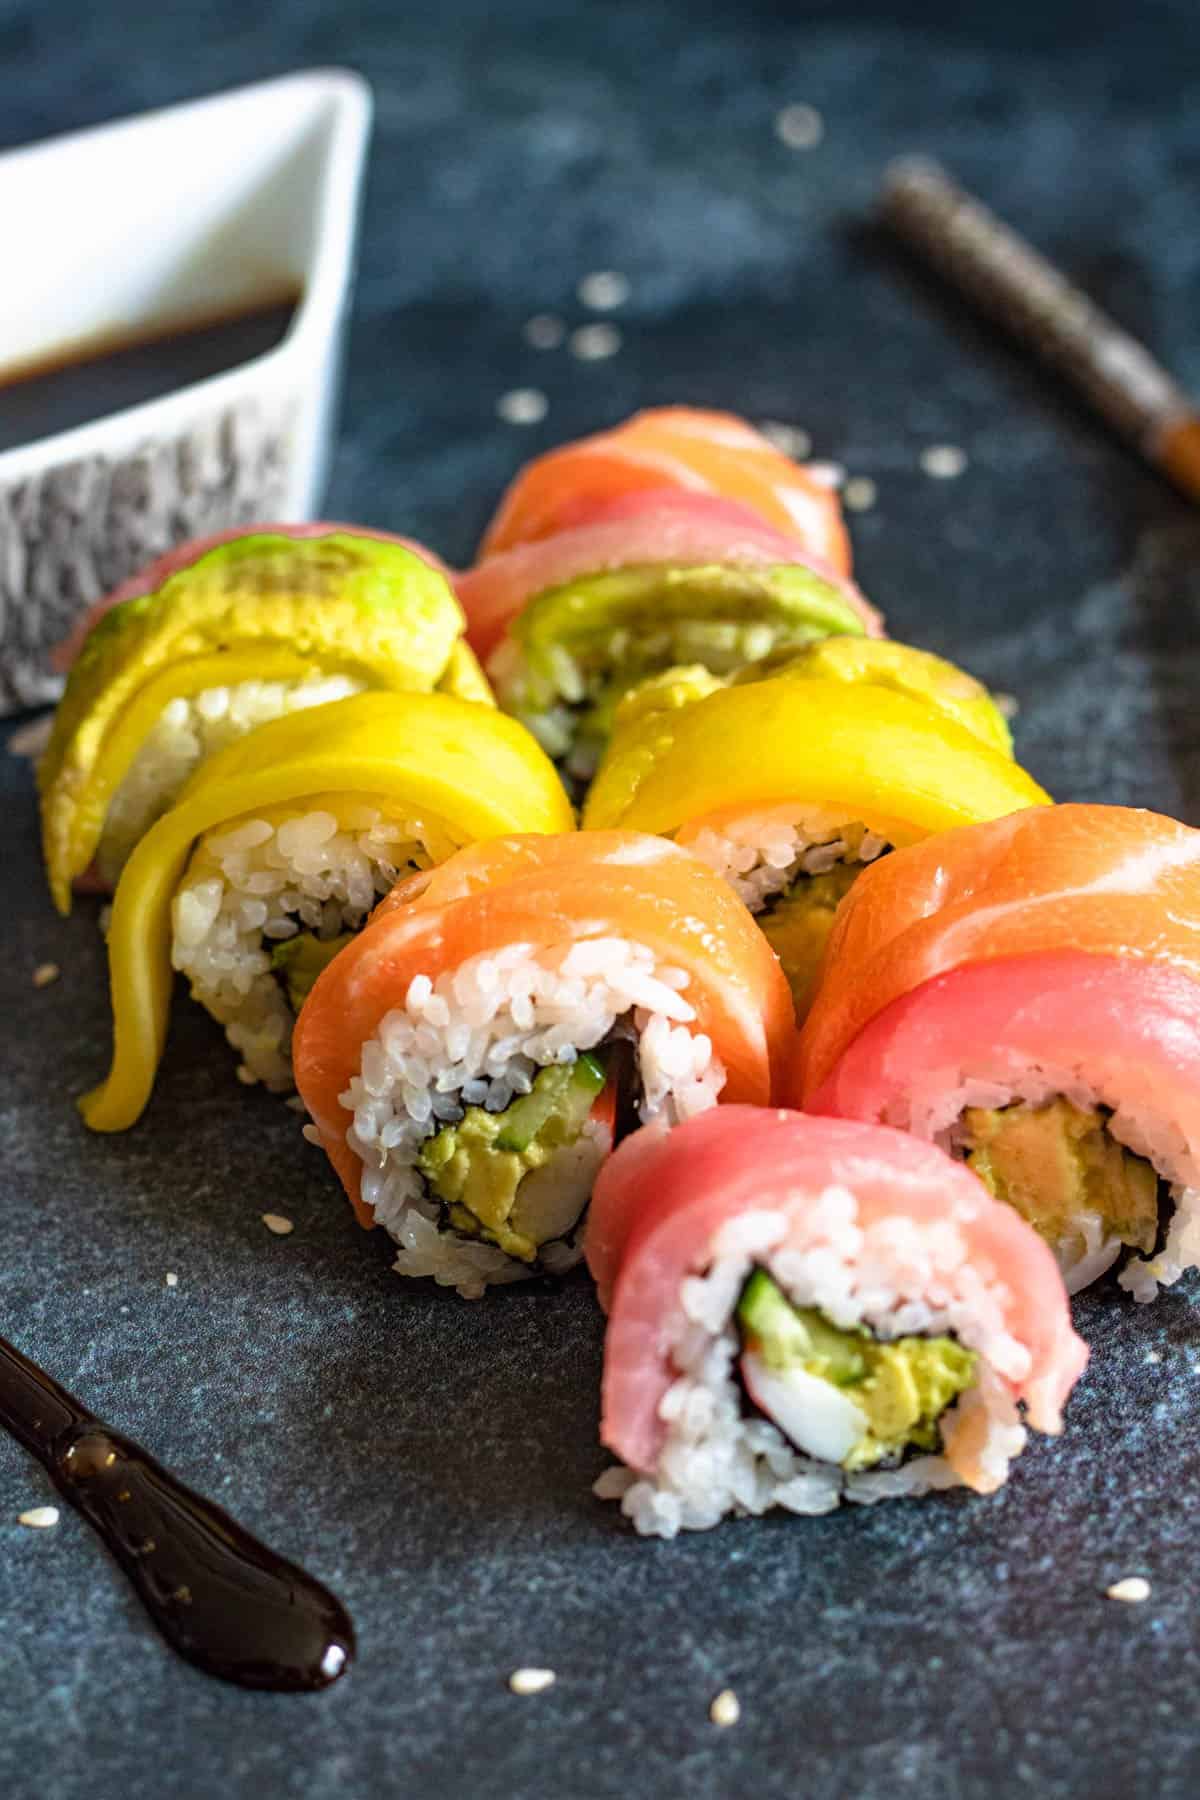 Slices of a Rainbow roll with a side of sauce.